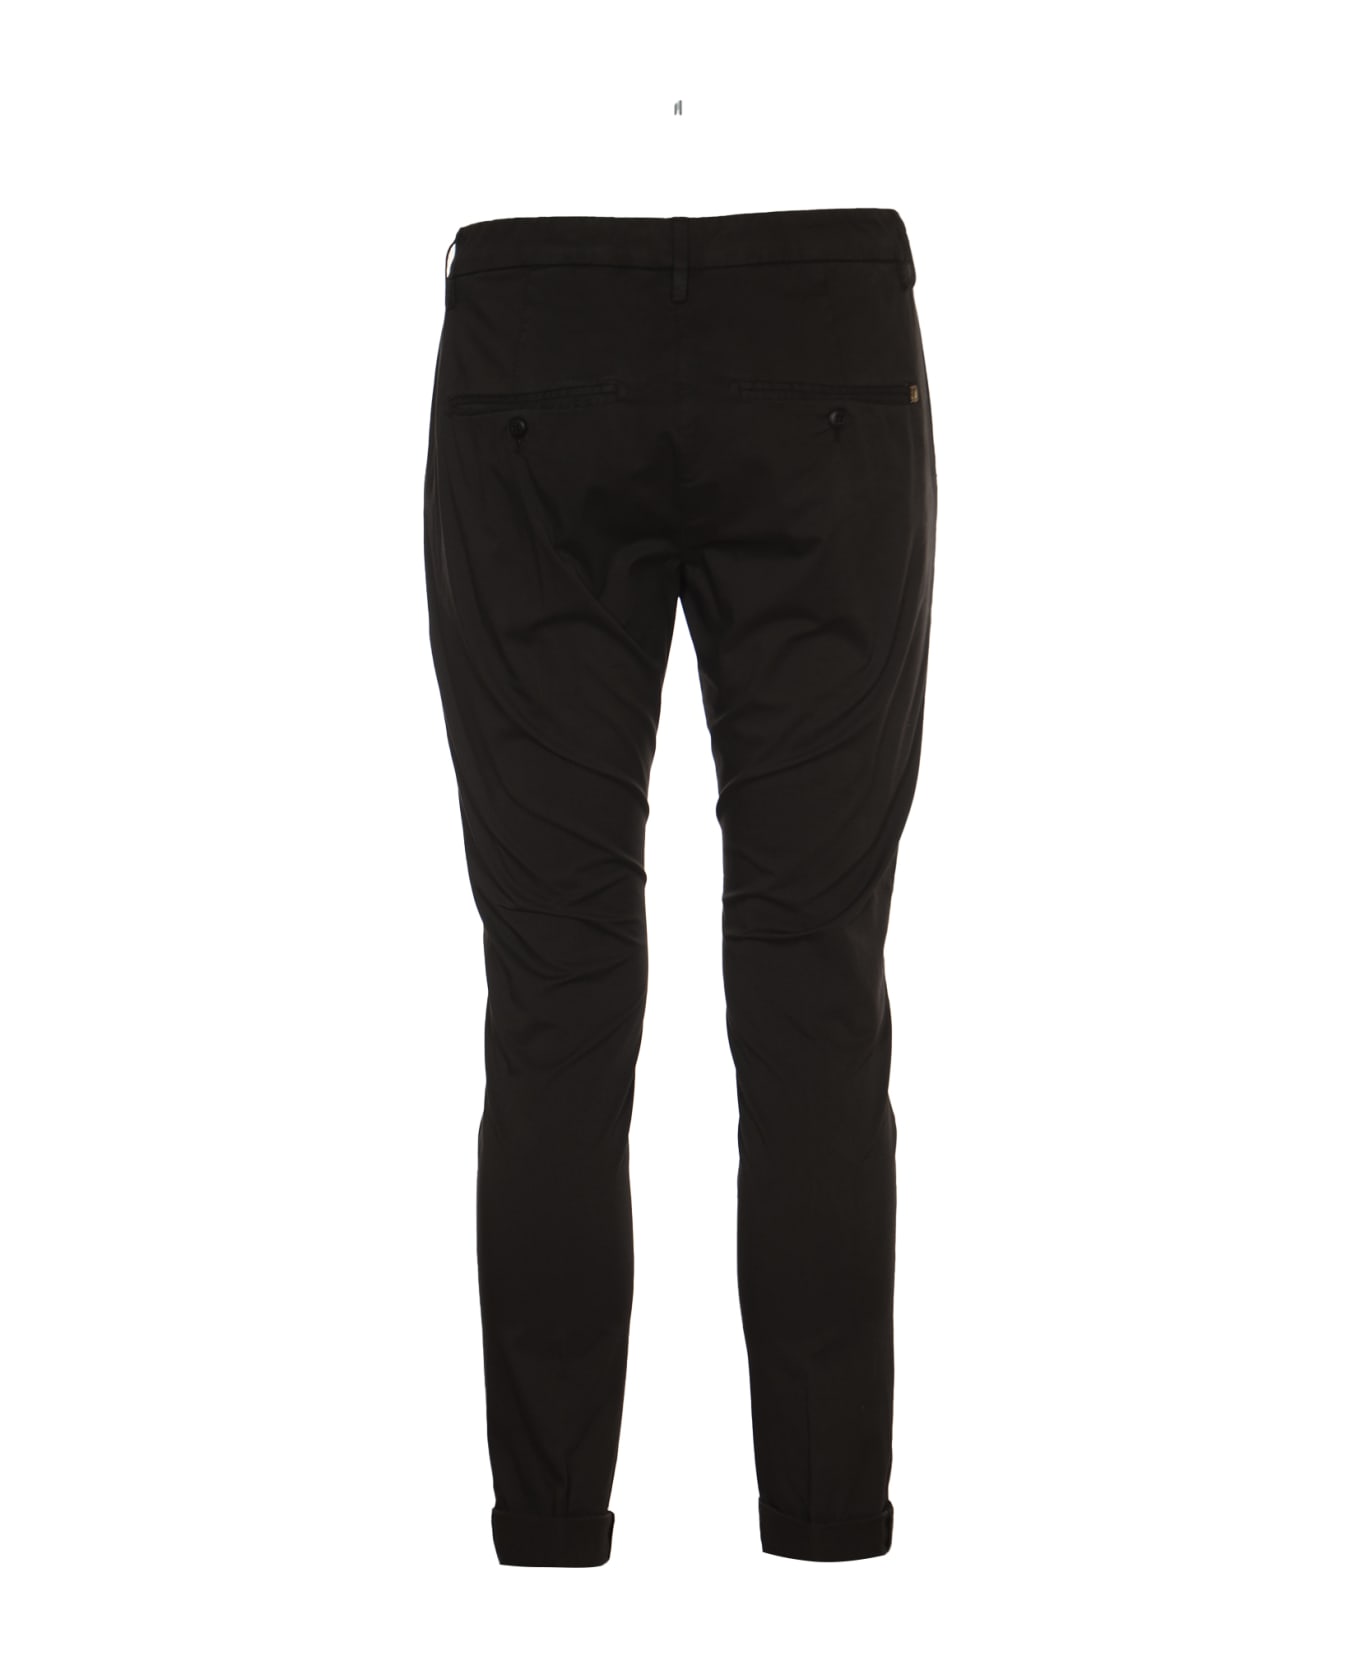 Dondup Concealed Skinny Trousers Dondup - BLACK